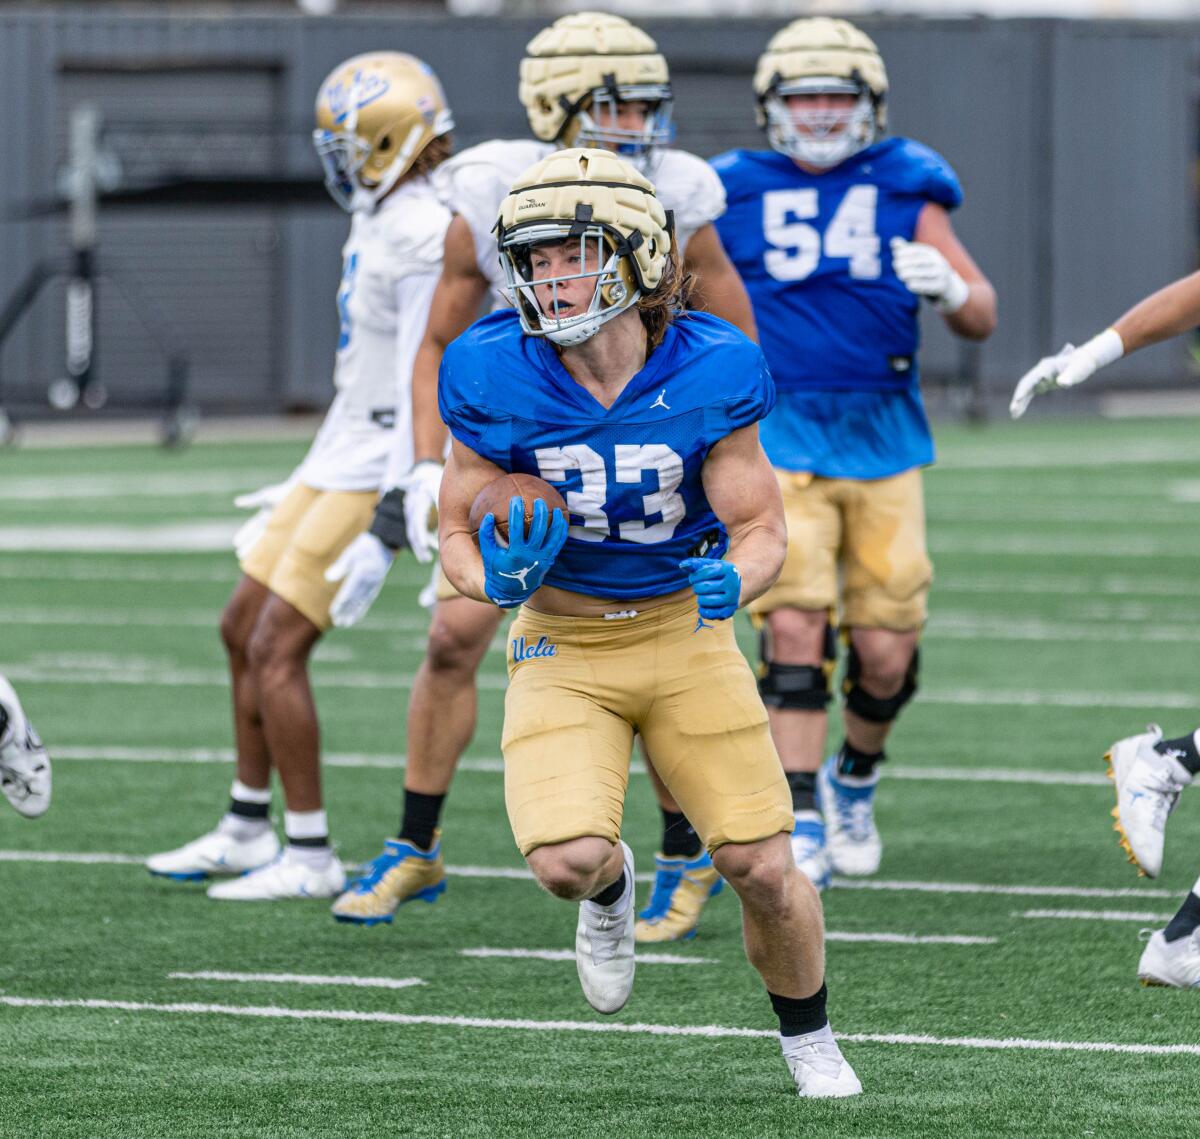 UCLA running back Carson Steele carries the ball during spring practice.